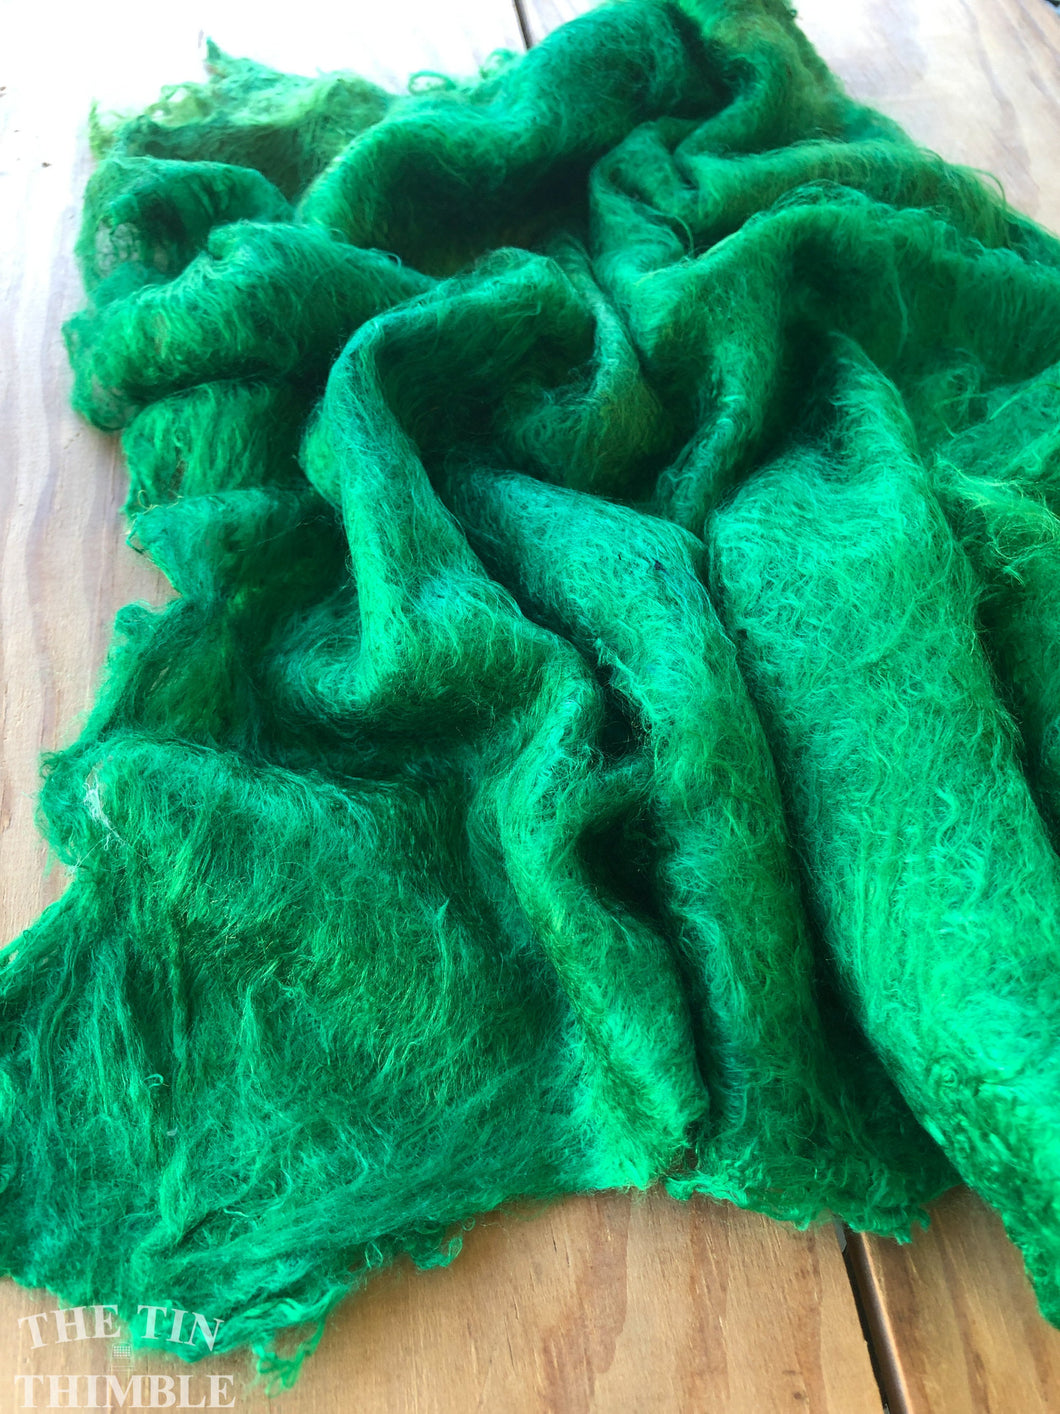 Hand Dyed Silk Mulberry Lap Fiber for Spinning or Felting in Emerald Green / 100% Silk Laps Similar to Silk Hankies for Felting or Spinning